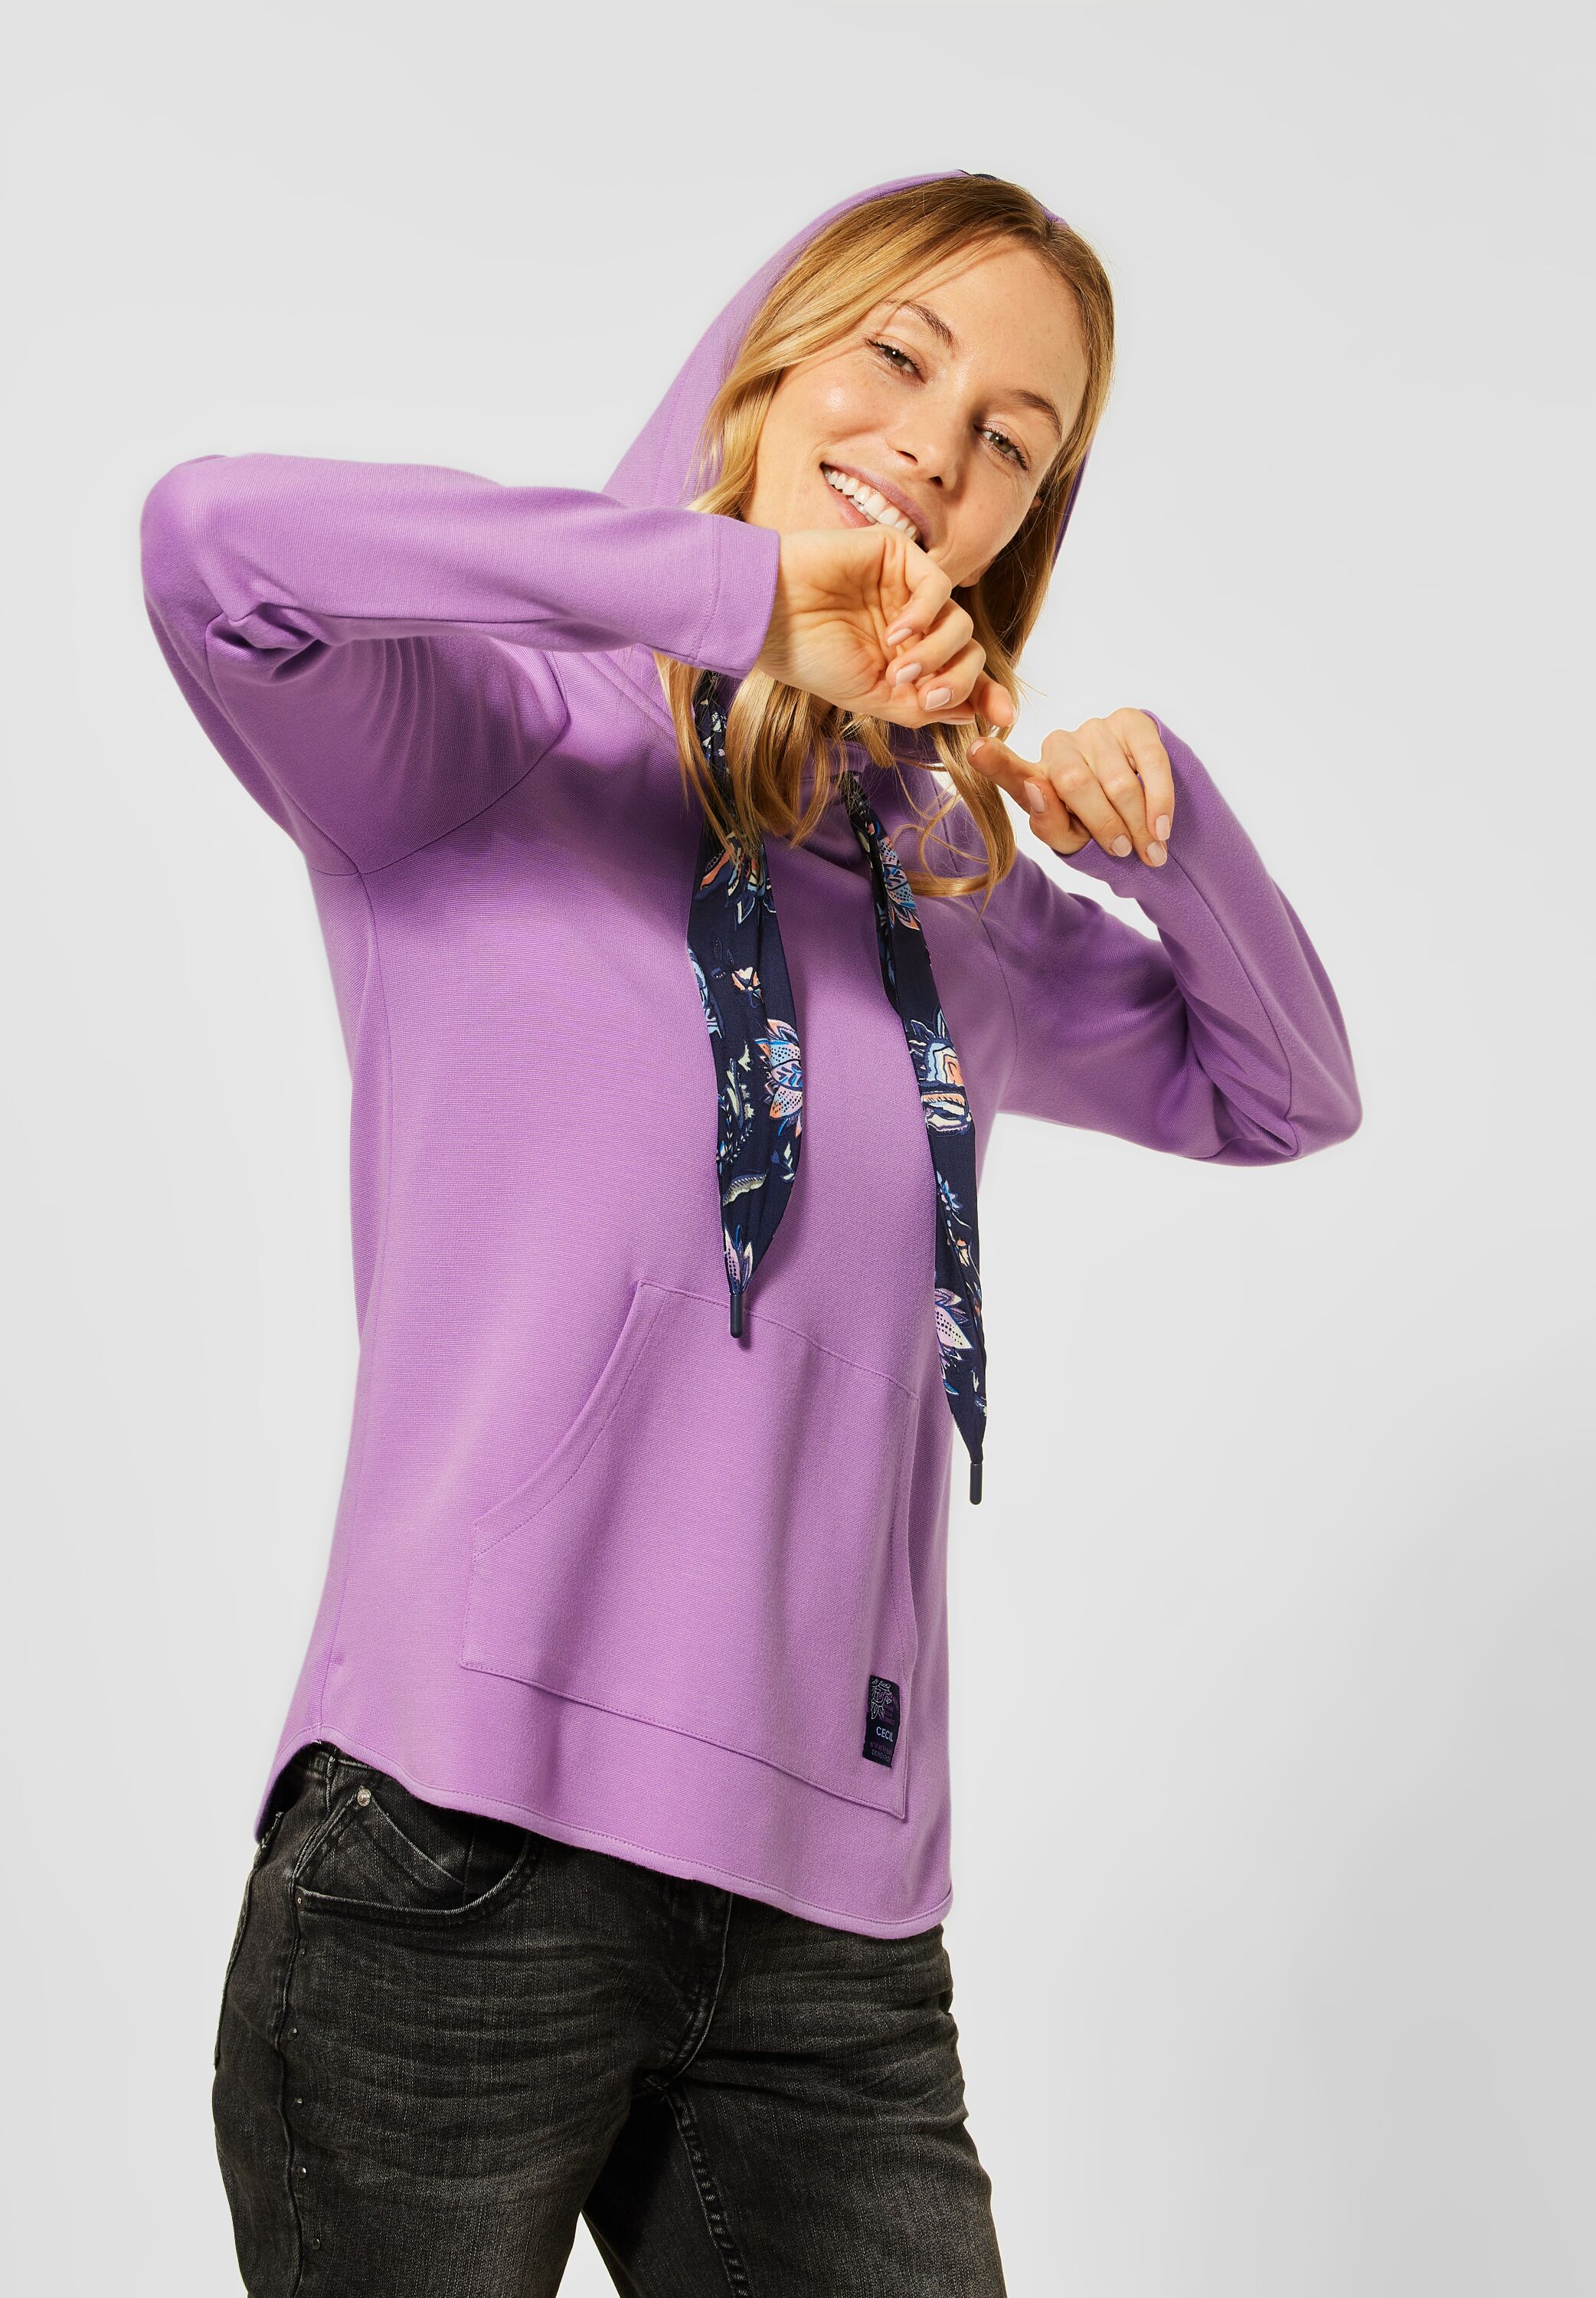 Mode Soft Shirt - Violet CECIL B315803-12746 in CONCEPT